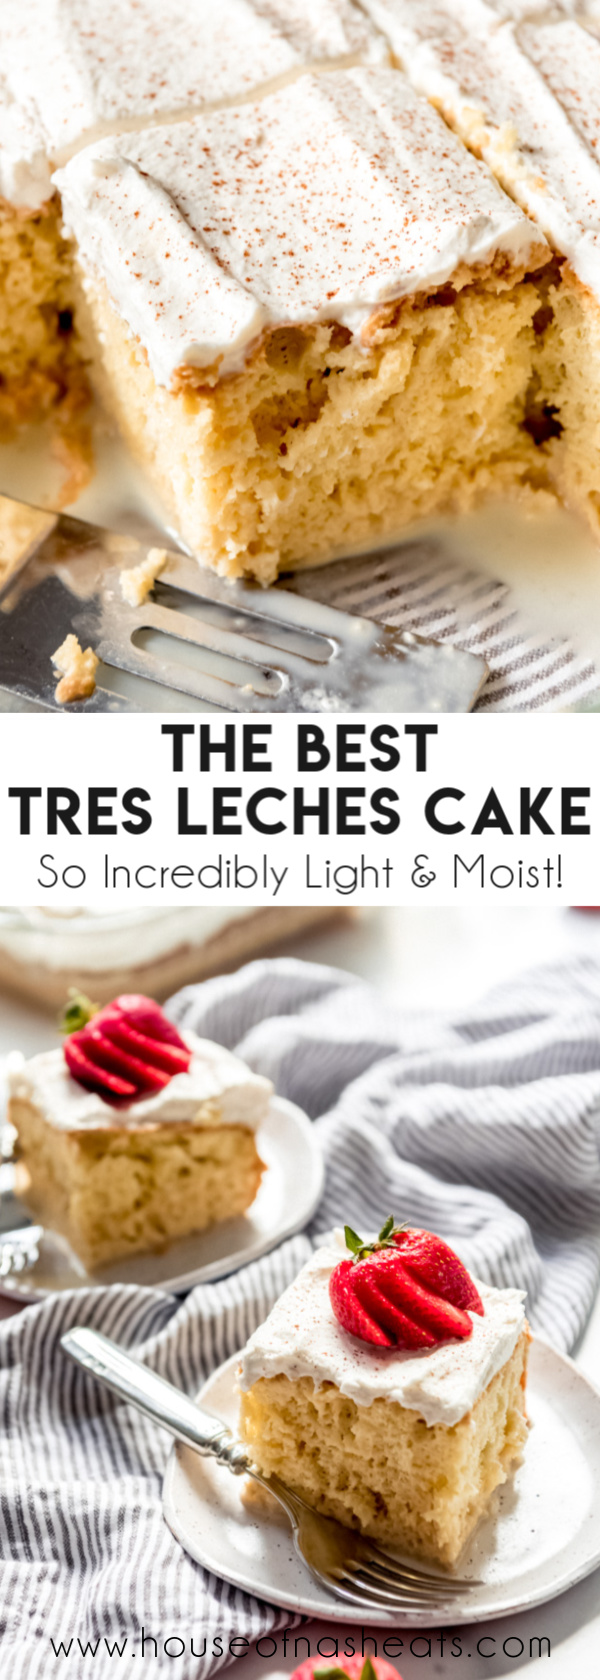 The BEST Homemade Tres Leches Cake - House of Nash Eats -   17 desserts Mexican simple ideas